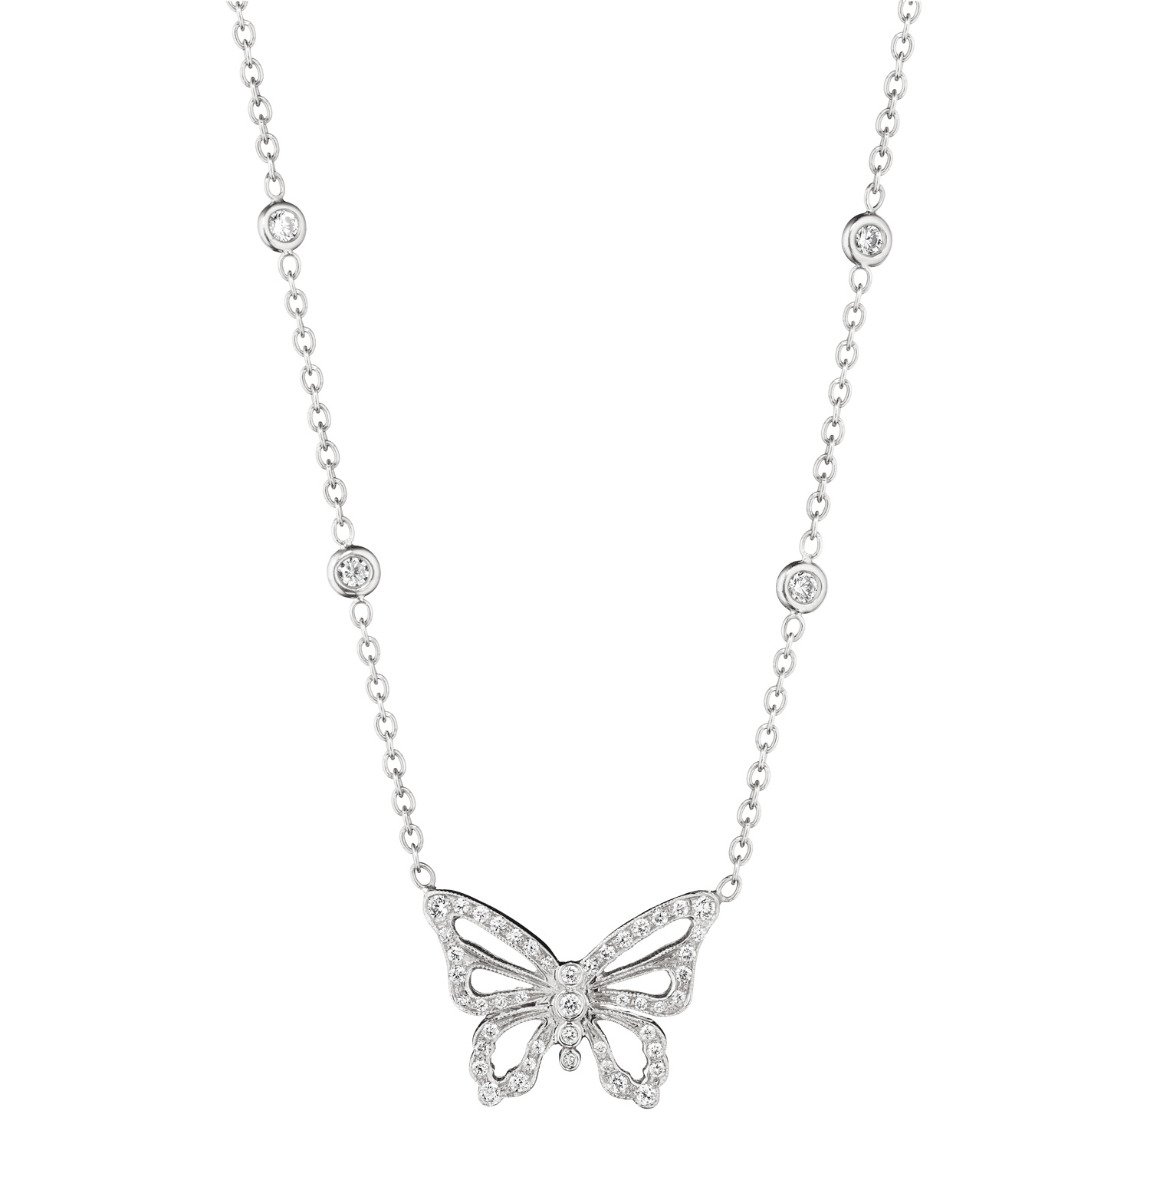 Penny Preville Diamond butterfly necklace in 18kt white gold with eyeglass diamond chain